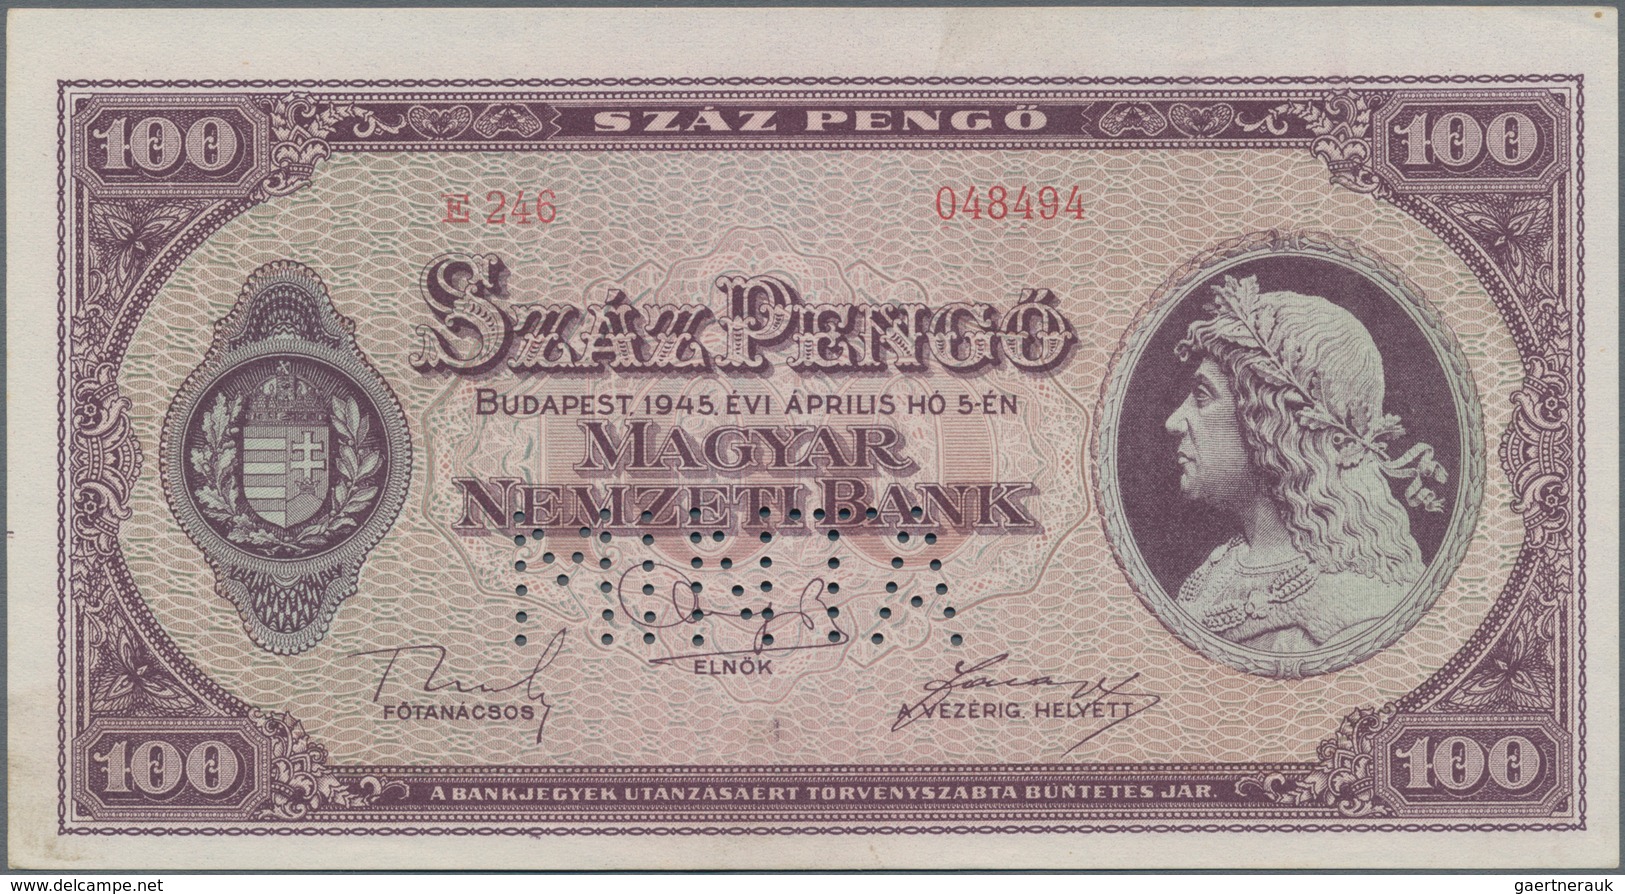 Hungary / Ungarn: Set with 7 banknotes series 1920 – 1946, all SPECIMEN with perforation "Minta" and